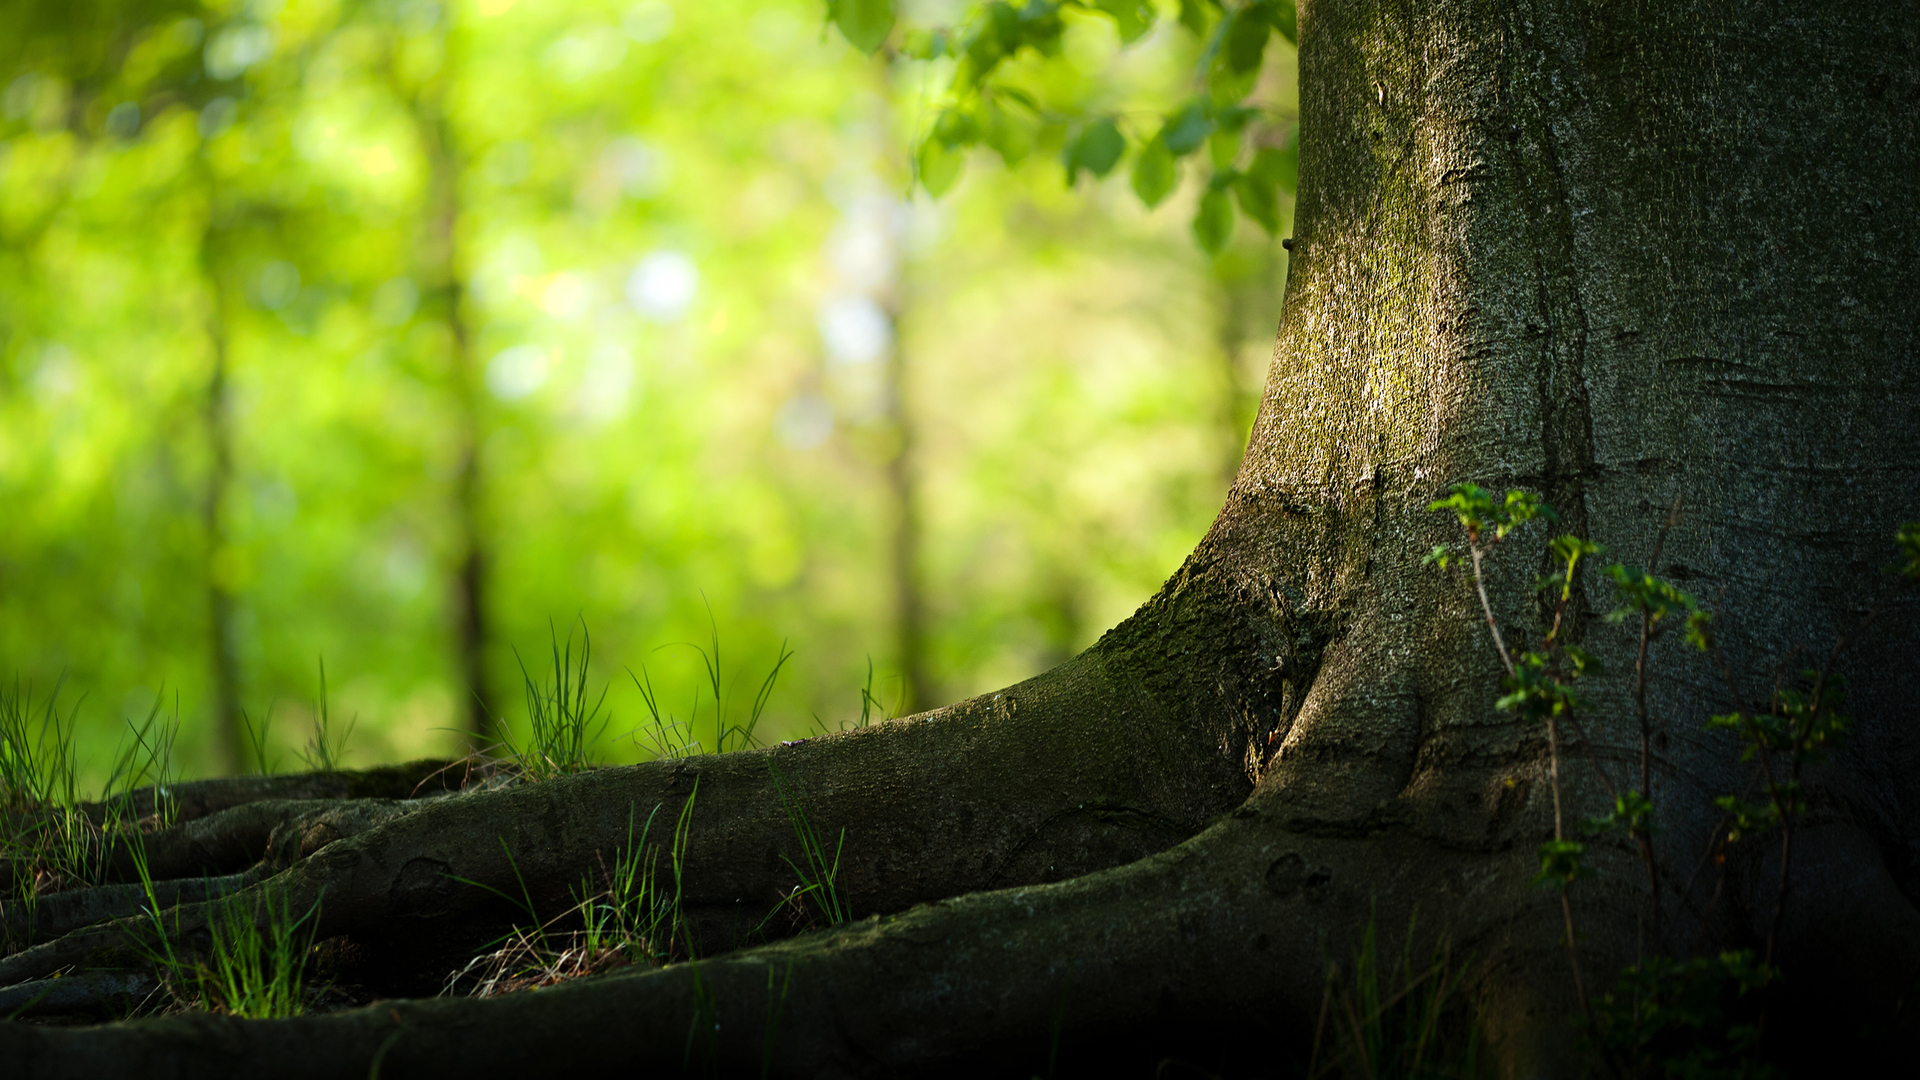 Trees Hd Wallpapers | Free HD Desktop Wallpapers - Widescreen Images